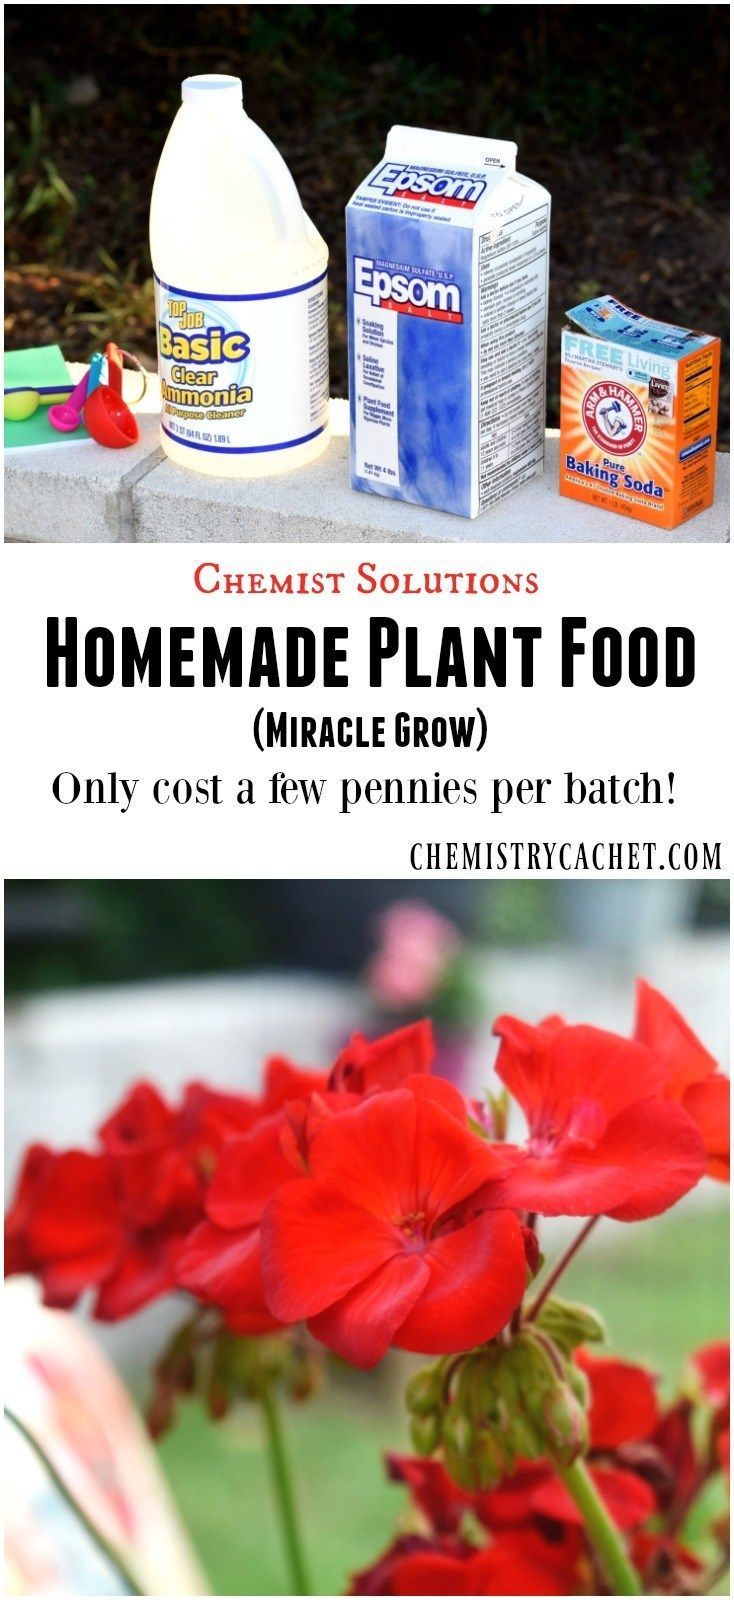 Chemist Solutions: Easy Homemade Plant Food Recipe -   13 planting healthy ideas